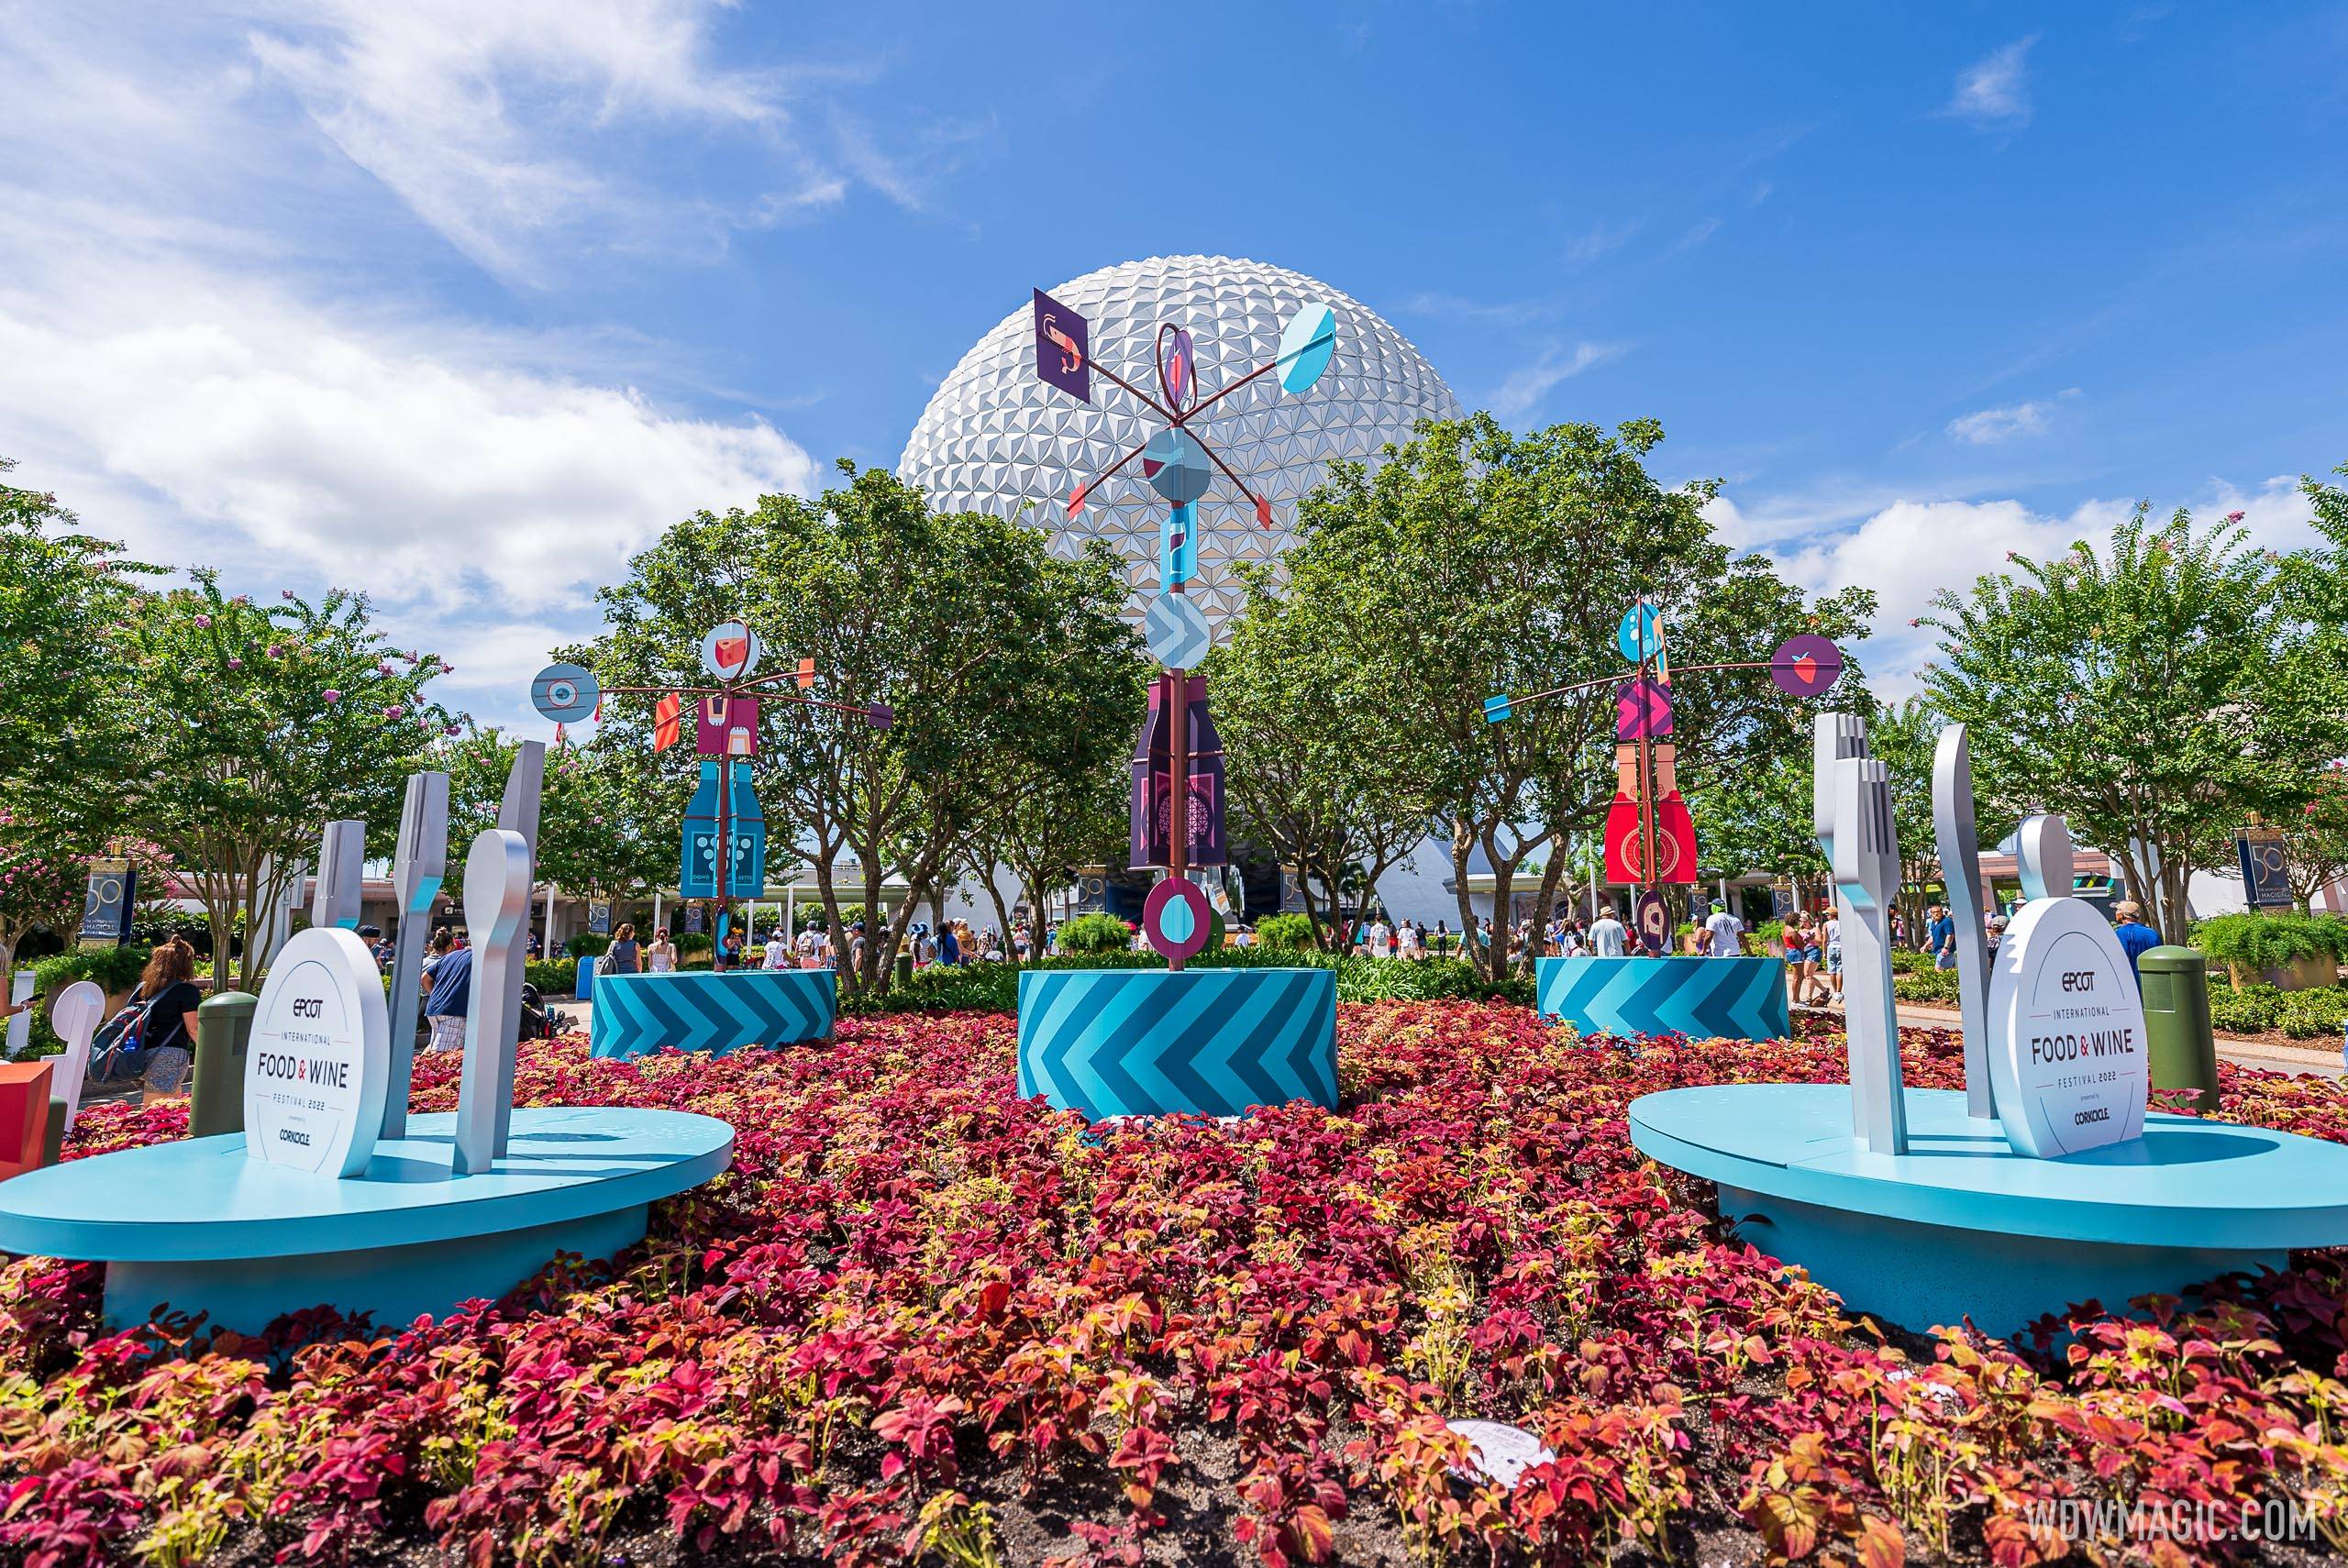 Opening day at the 2022 EPCOT International Food and Wine Festival